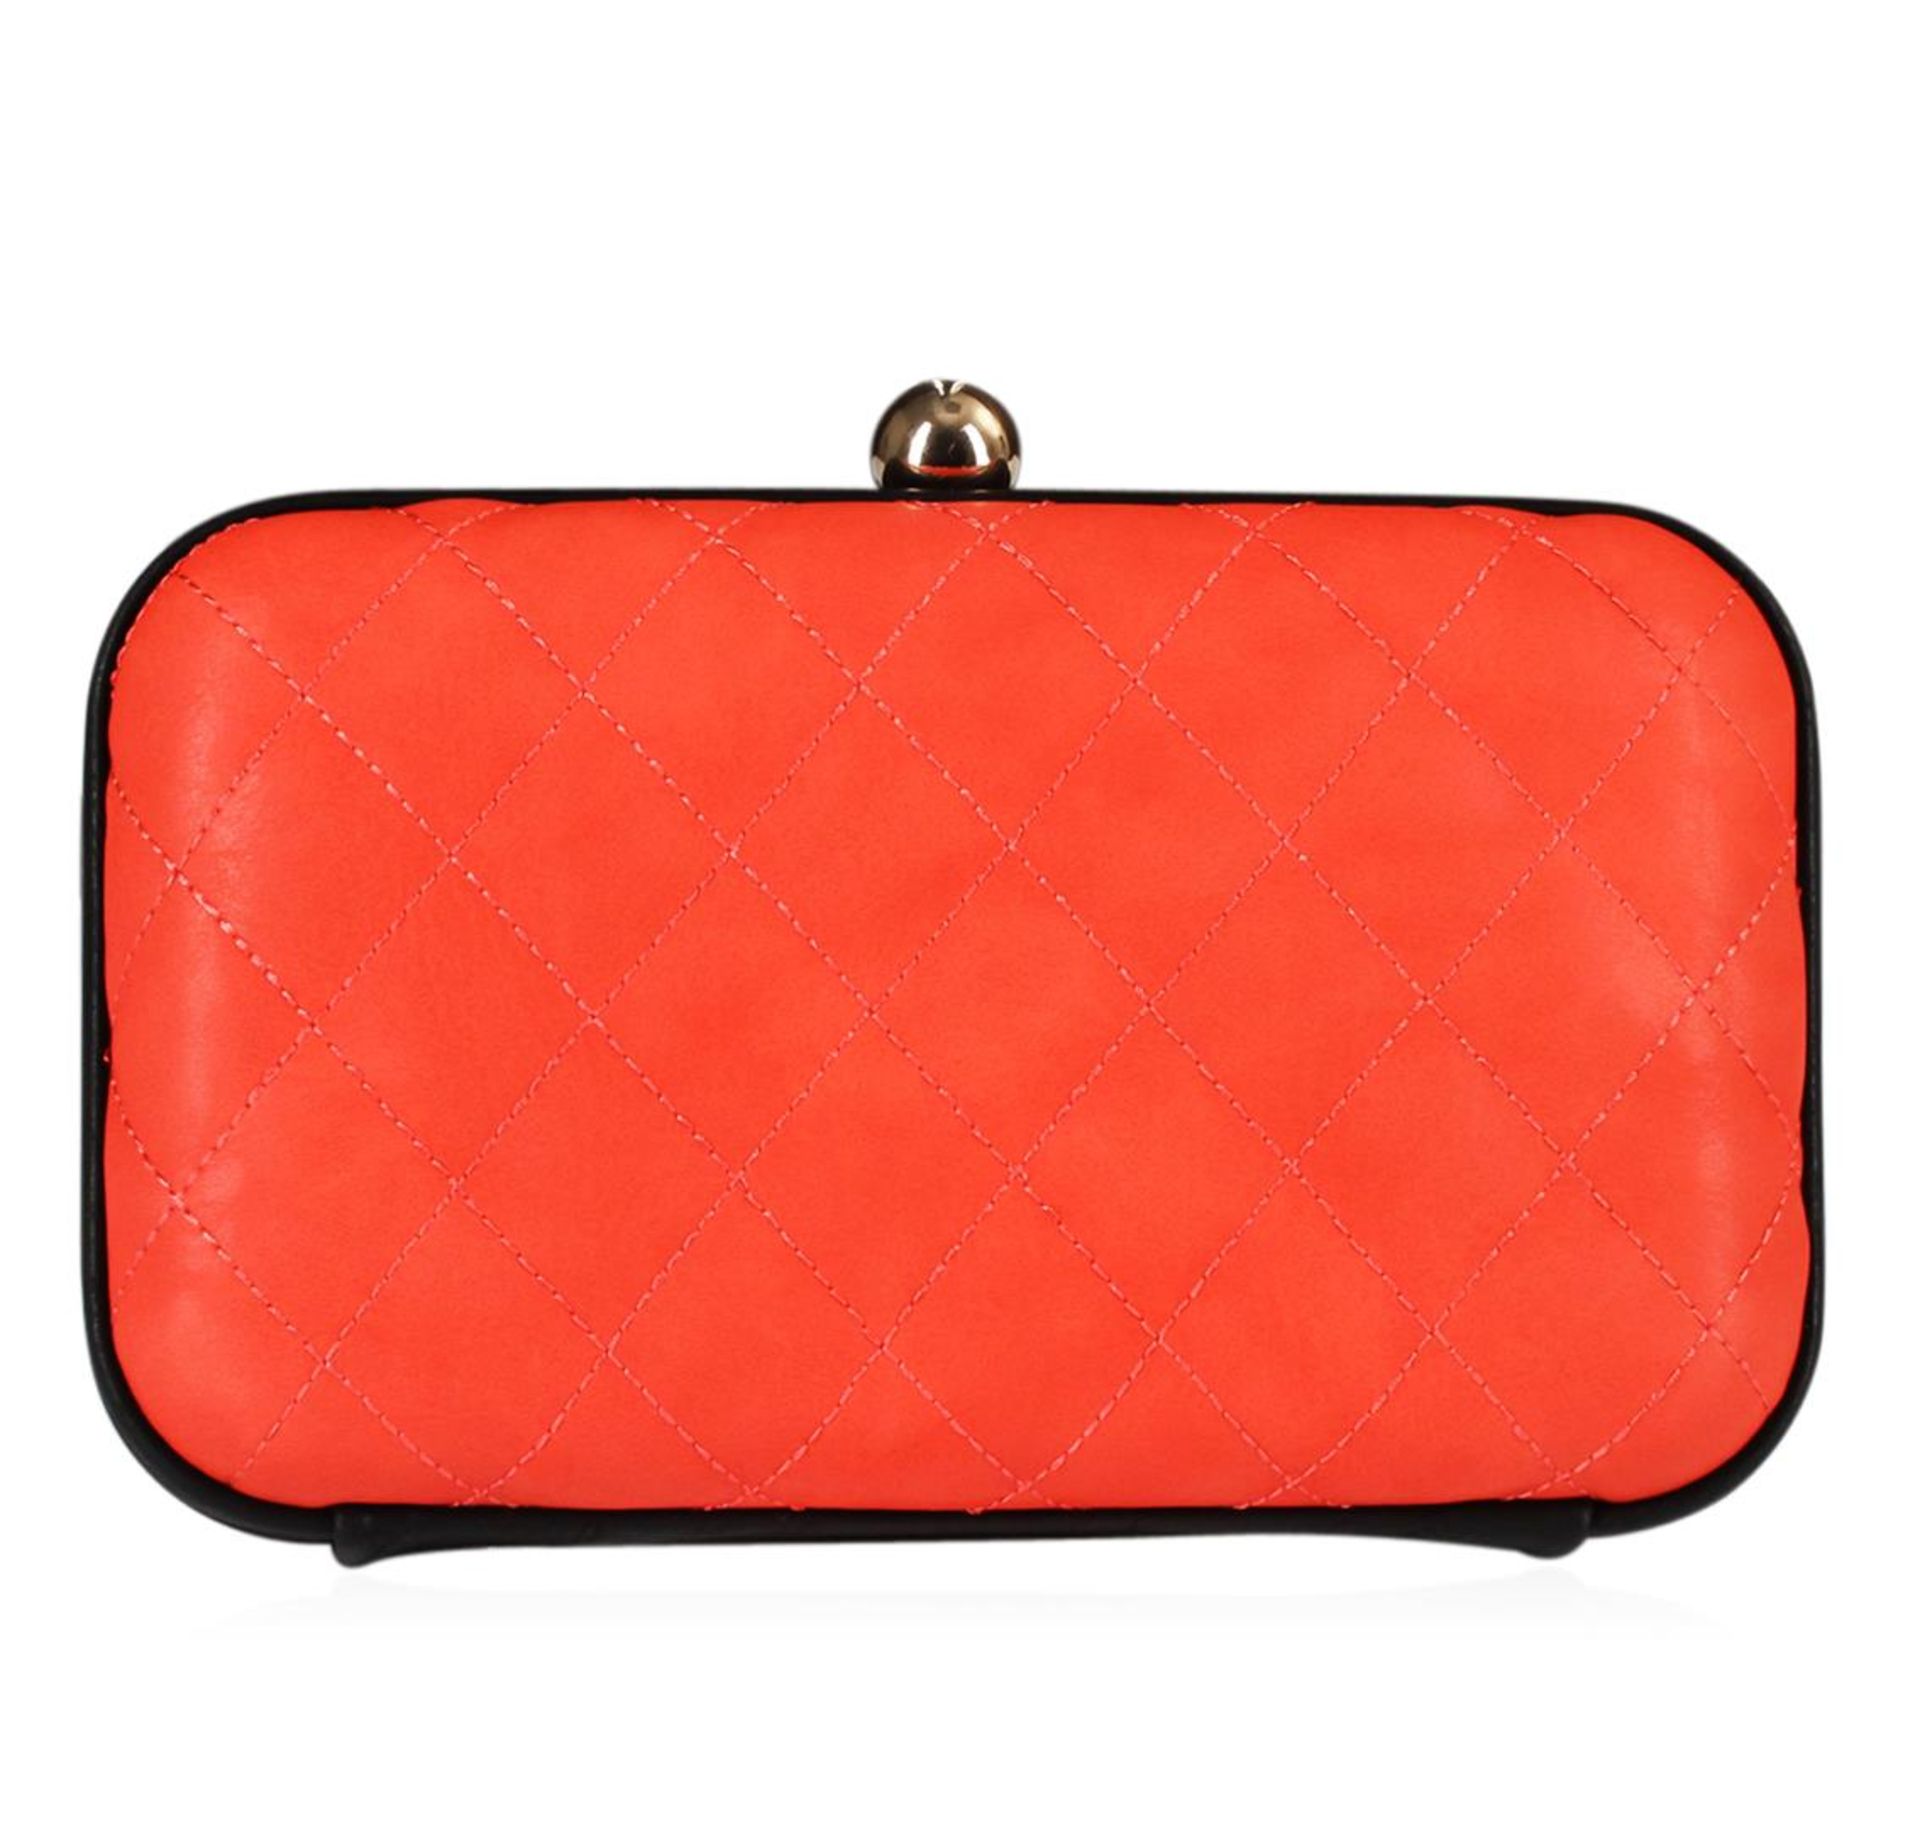 Coral Tufted Evening Clutch